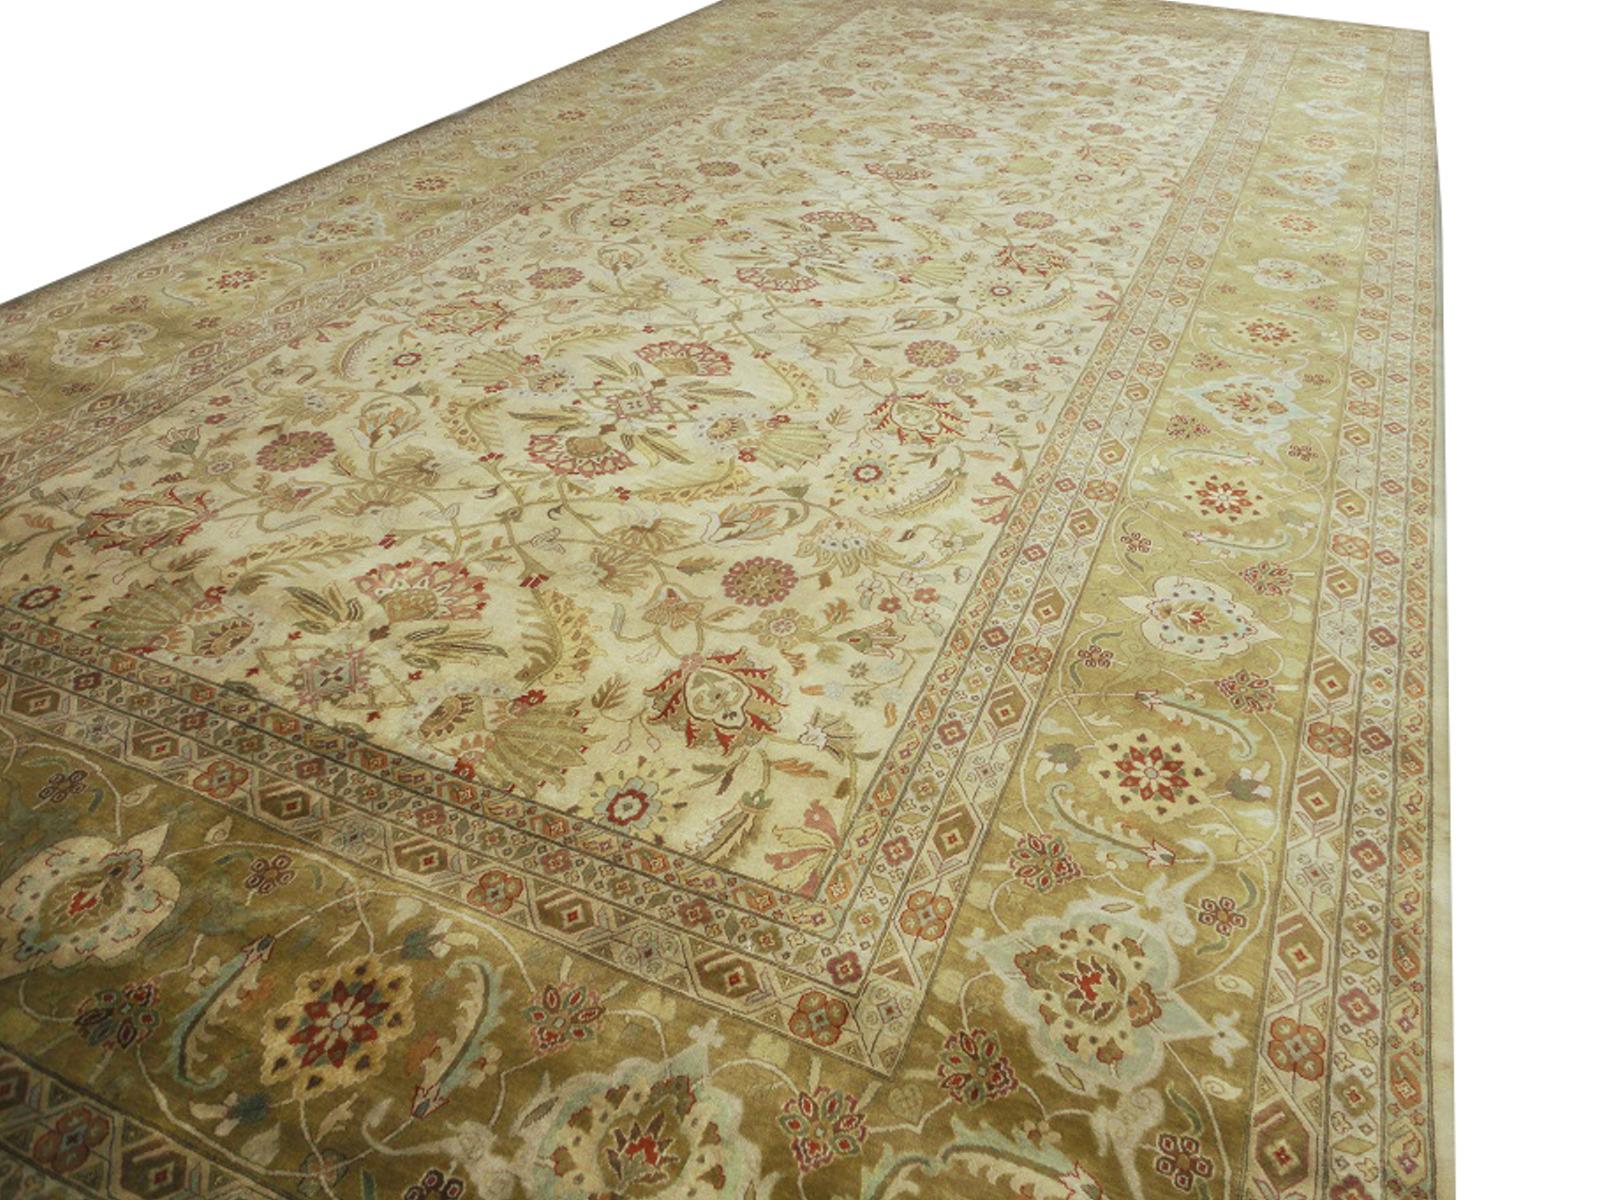 A beautiful oversized contemporary design carpet, hand knotted using finest wool. On a light crème field, the design of Lotus blossoms standing next to each other executed in gold, red and green tones. Design Influences are from Persian Tabriz